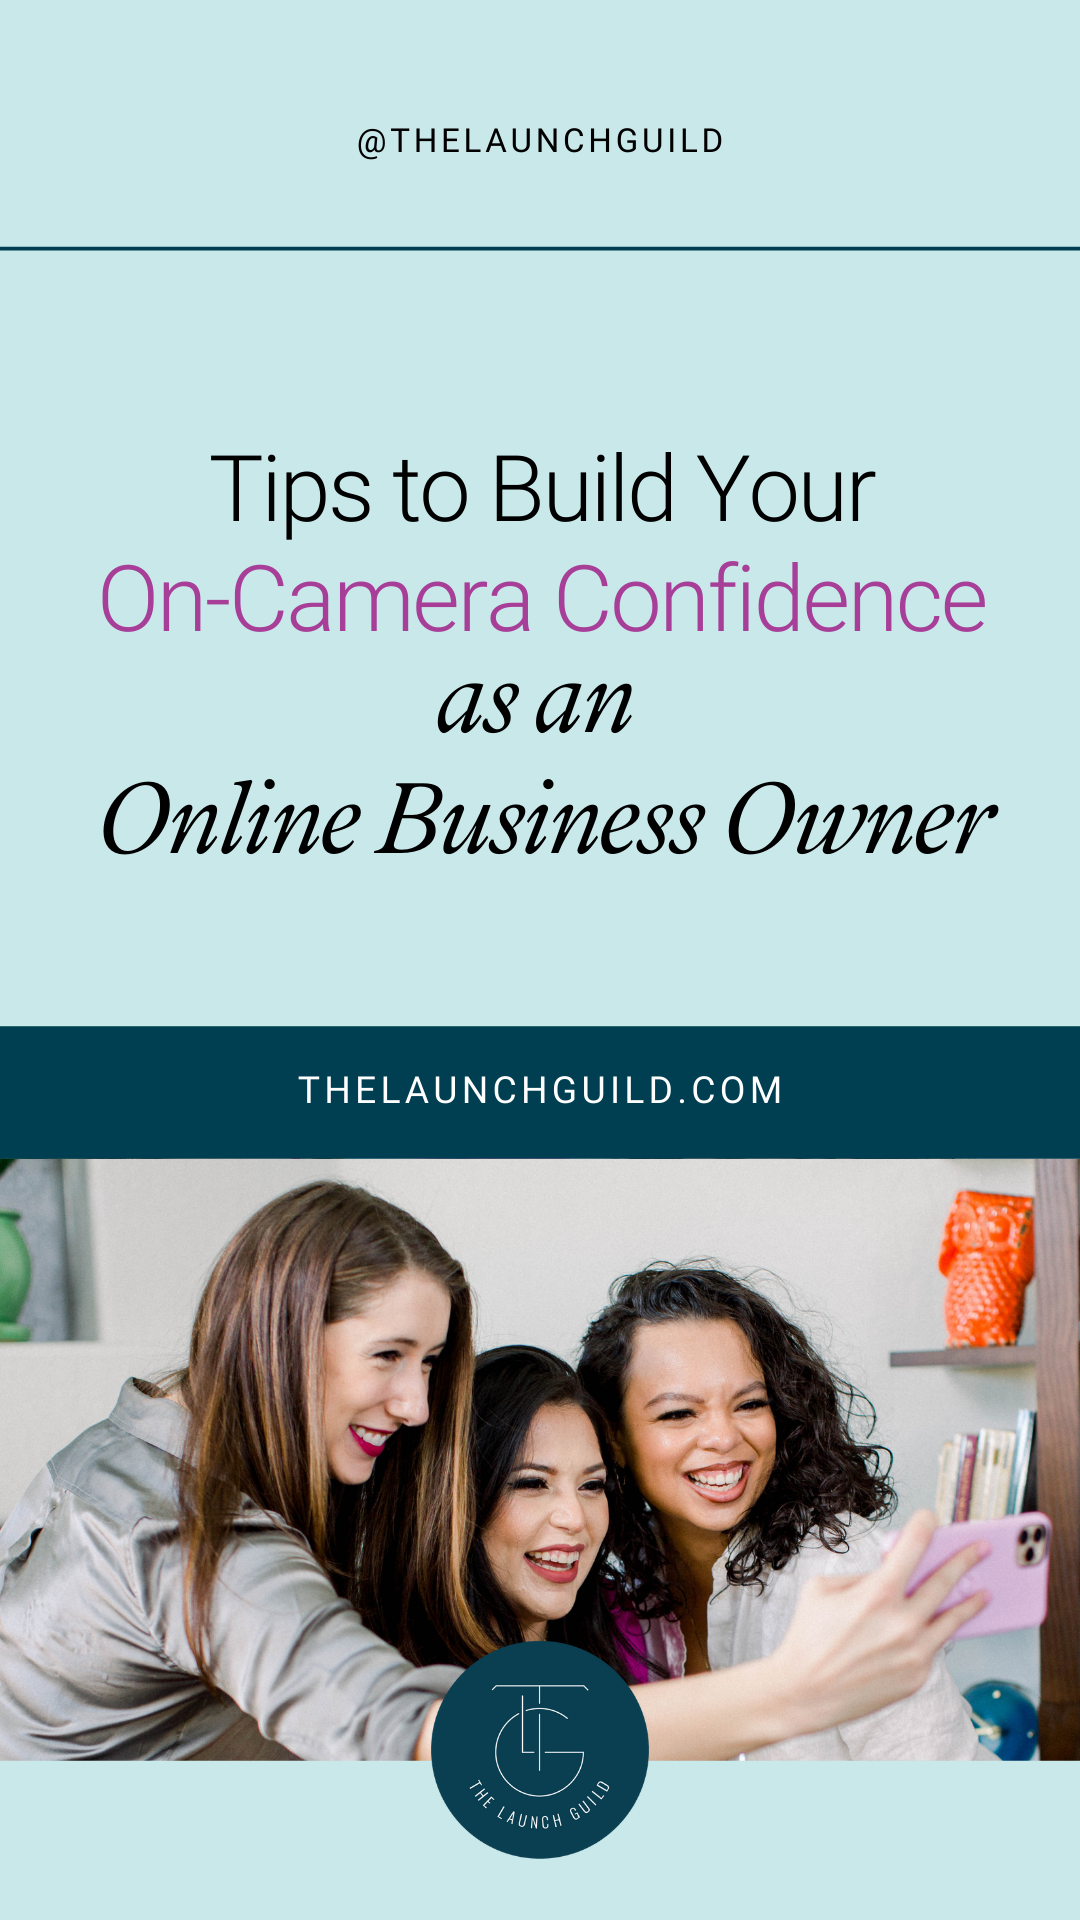 TLG-Tips-to-Build-Your-On-Camera-Confidence-as-an-Online-Business-Owner-TLG-Blog.png